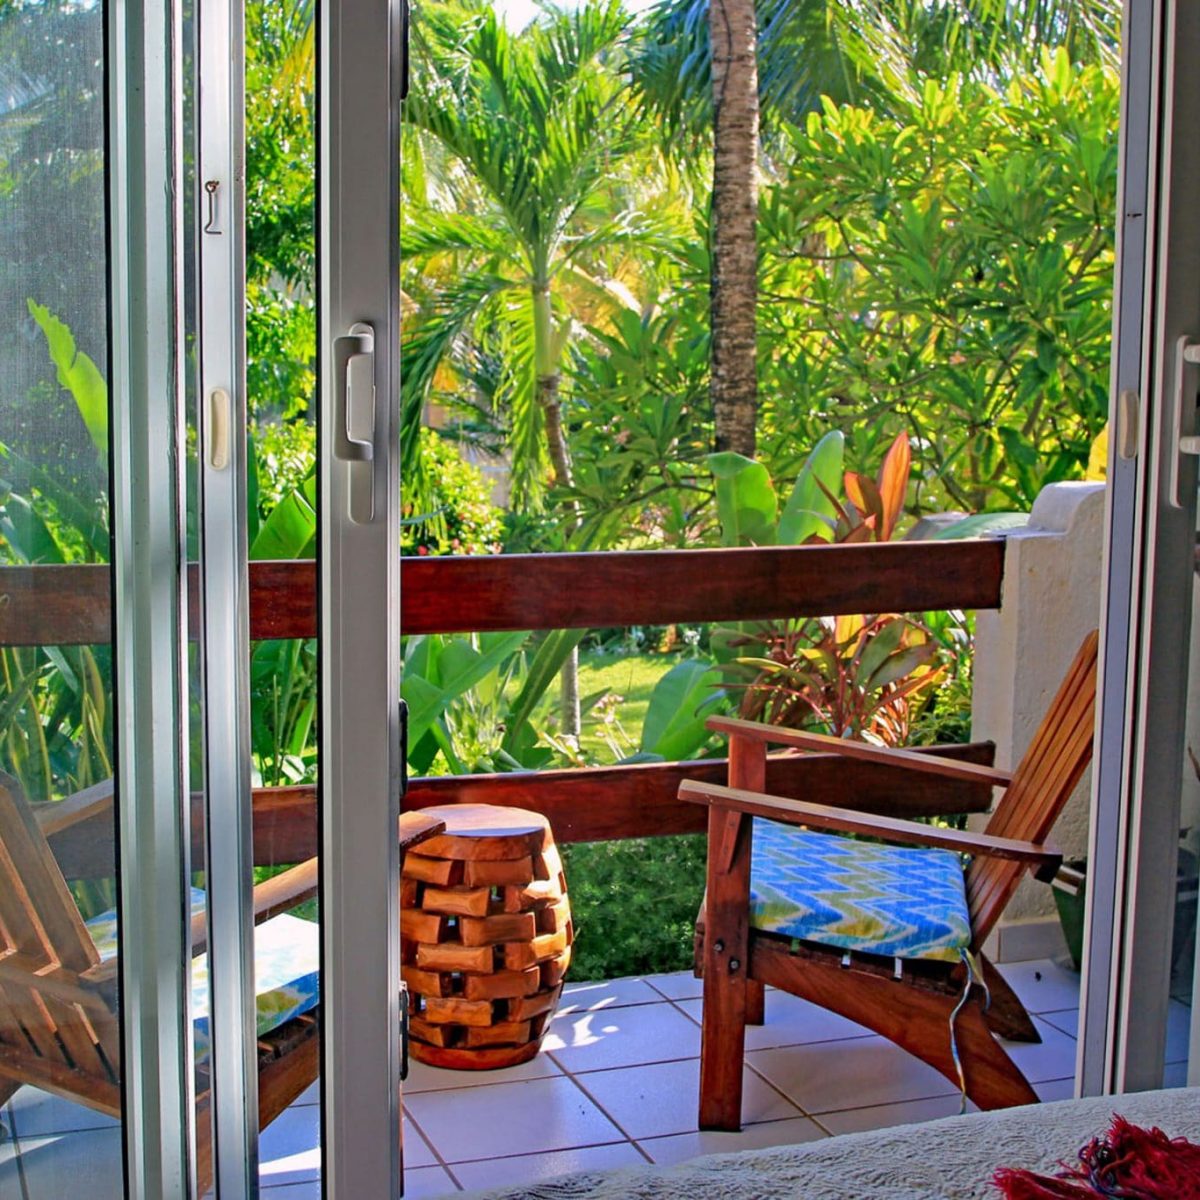 Seascape, La Sirena 1: 2nd Bedroom Porch Looks into Our Marvelous Gardens and Has More! Great Seating